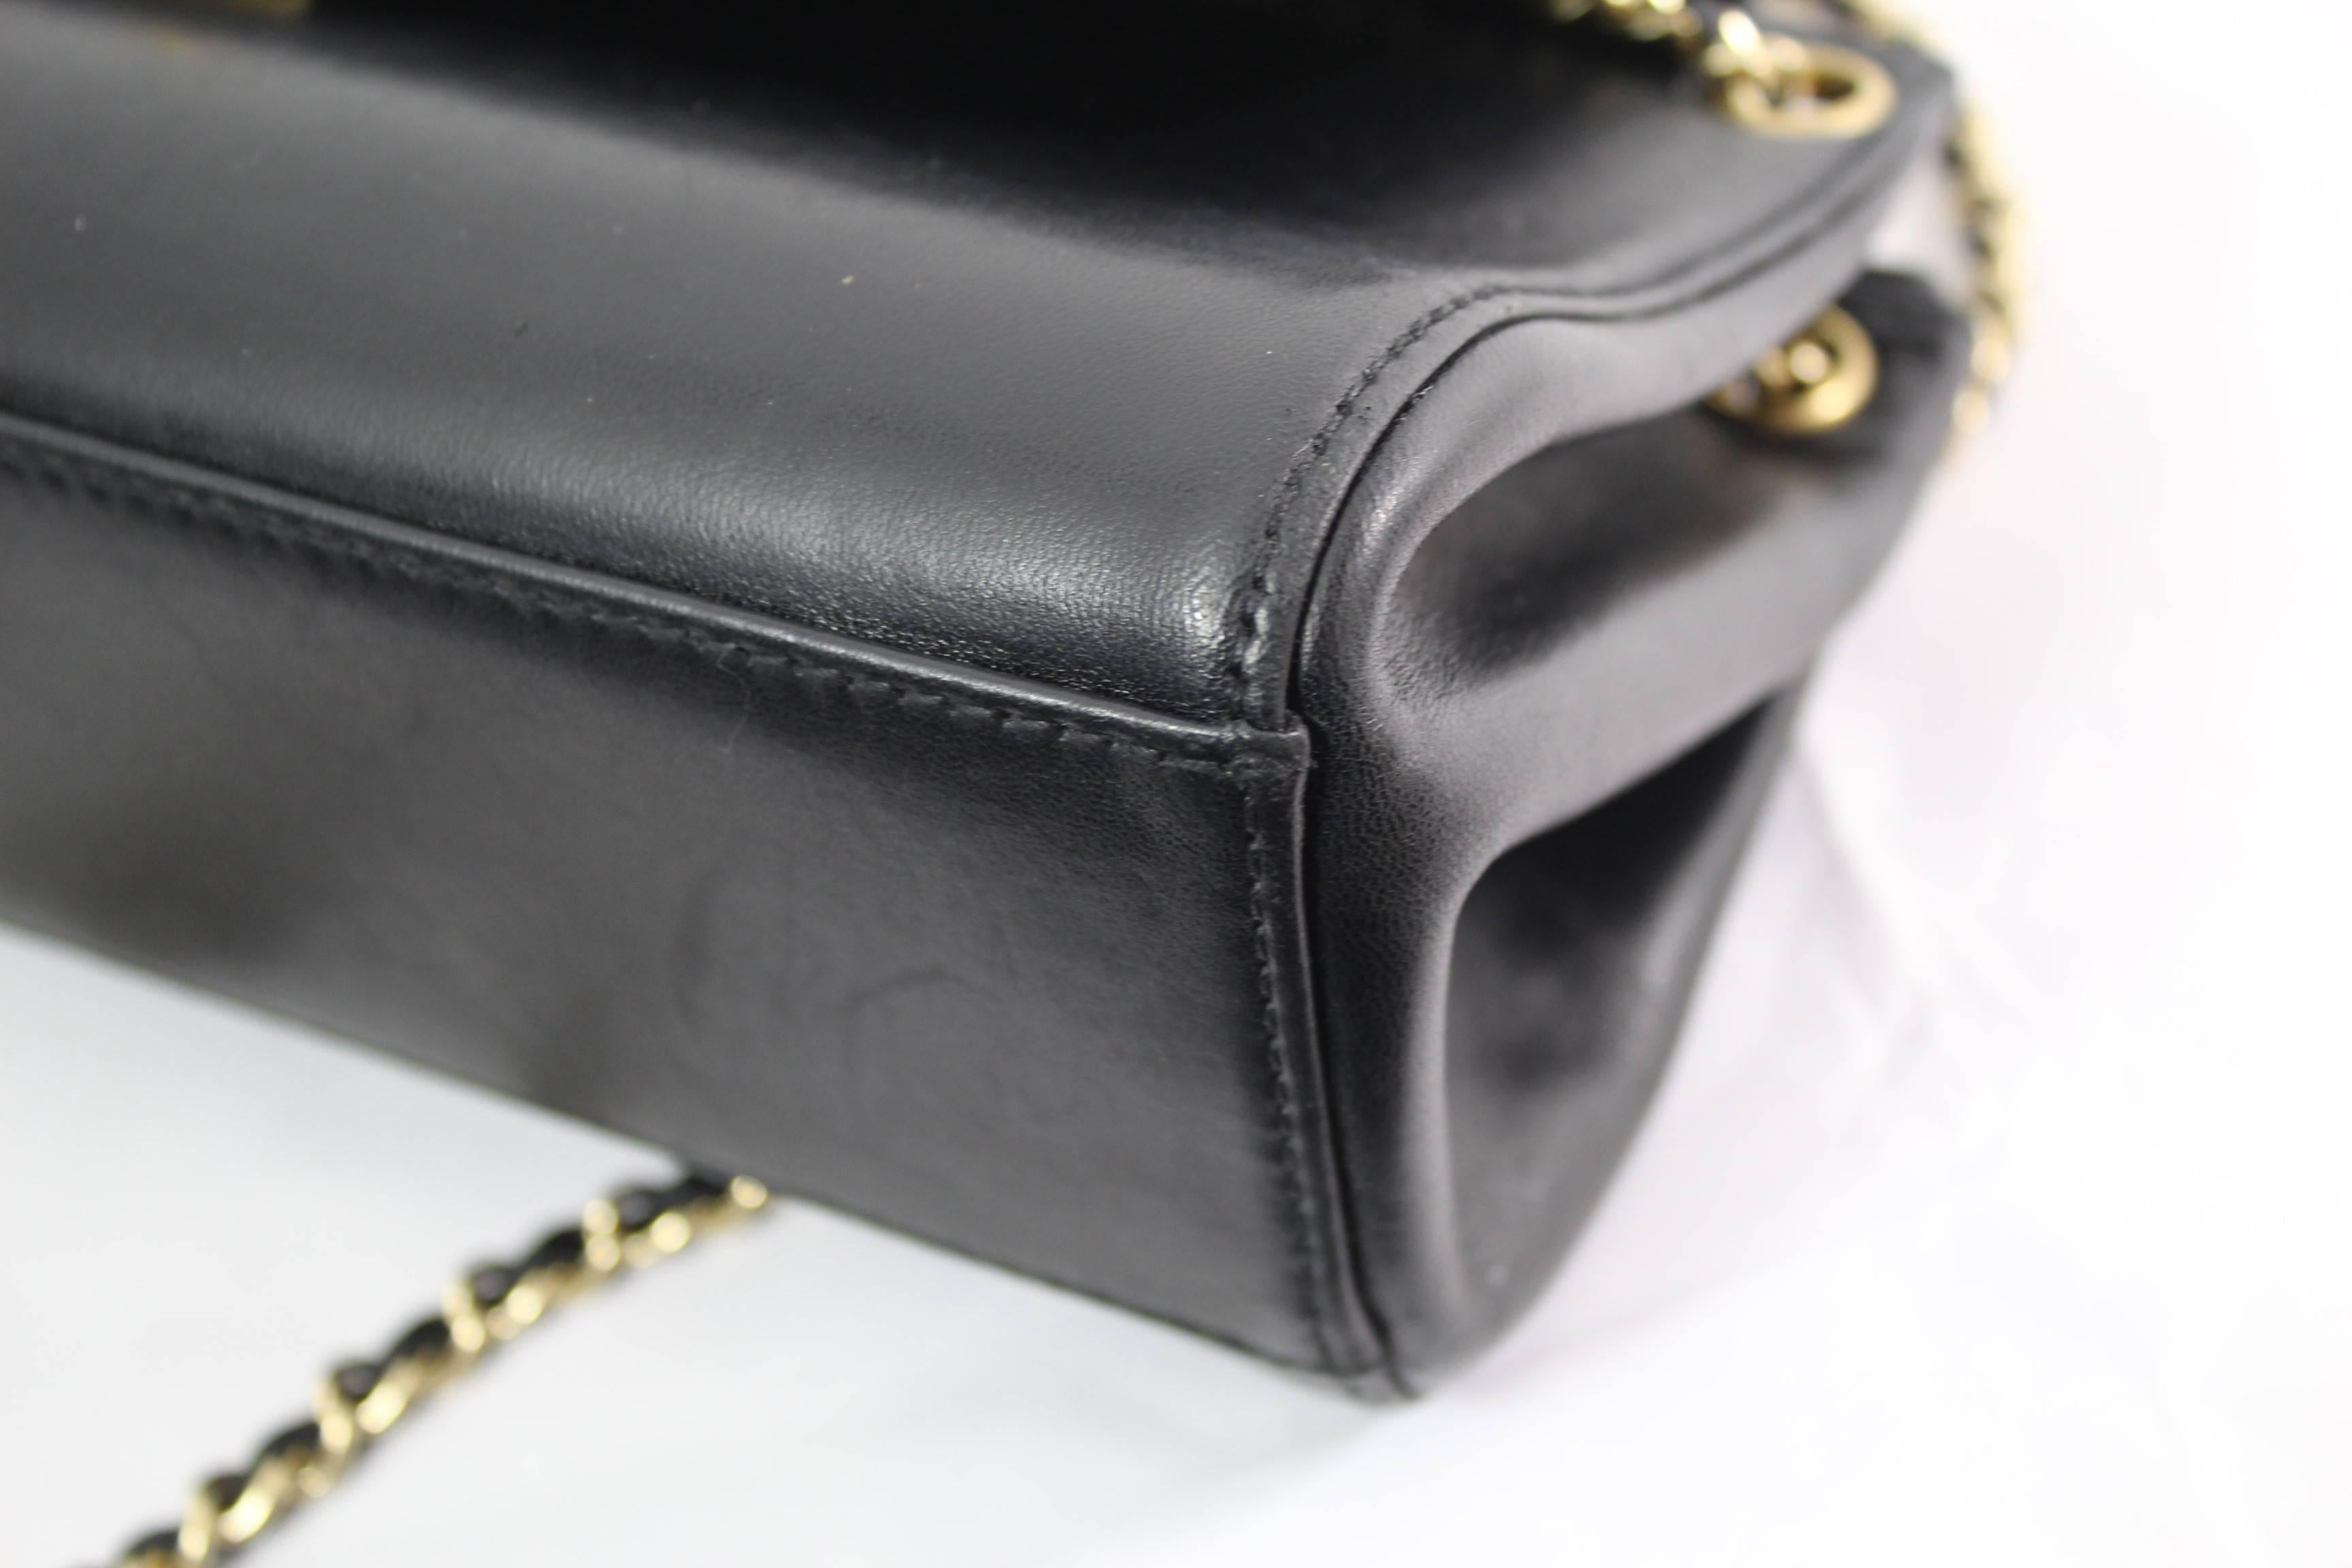 Chanel Black Lambskin leather and golden hardware shopper bag.

Siimple ou double chain
2.55 clasp
Good conditon, some signs of wear
Size 10x6.5 inches

Chain in really good cndition